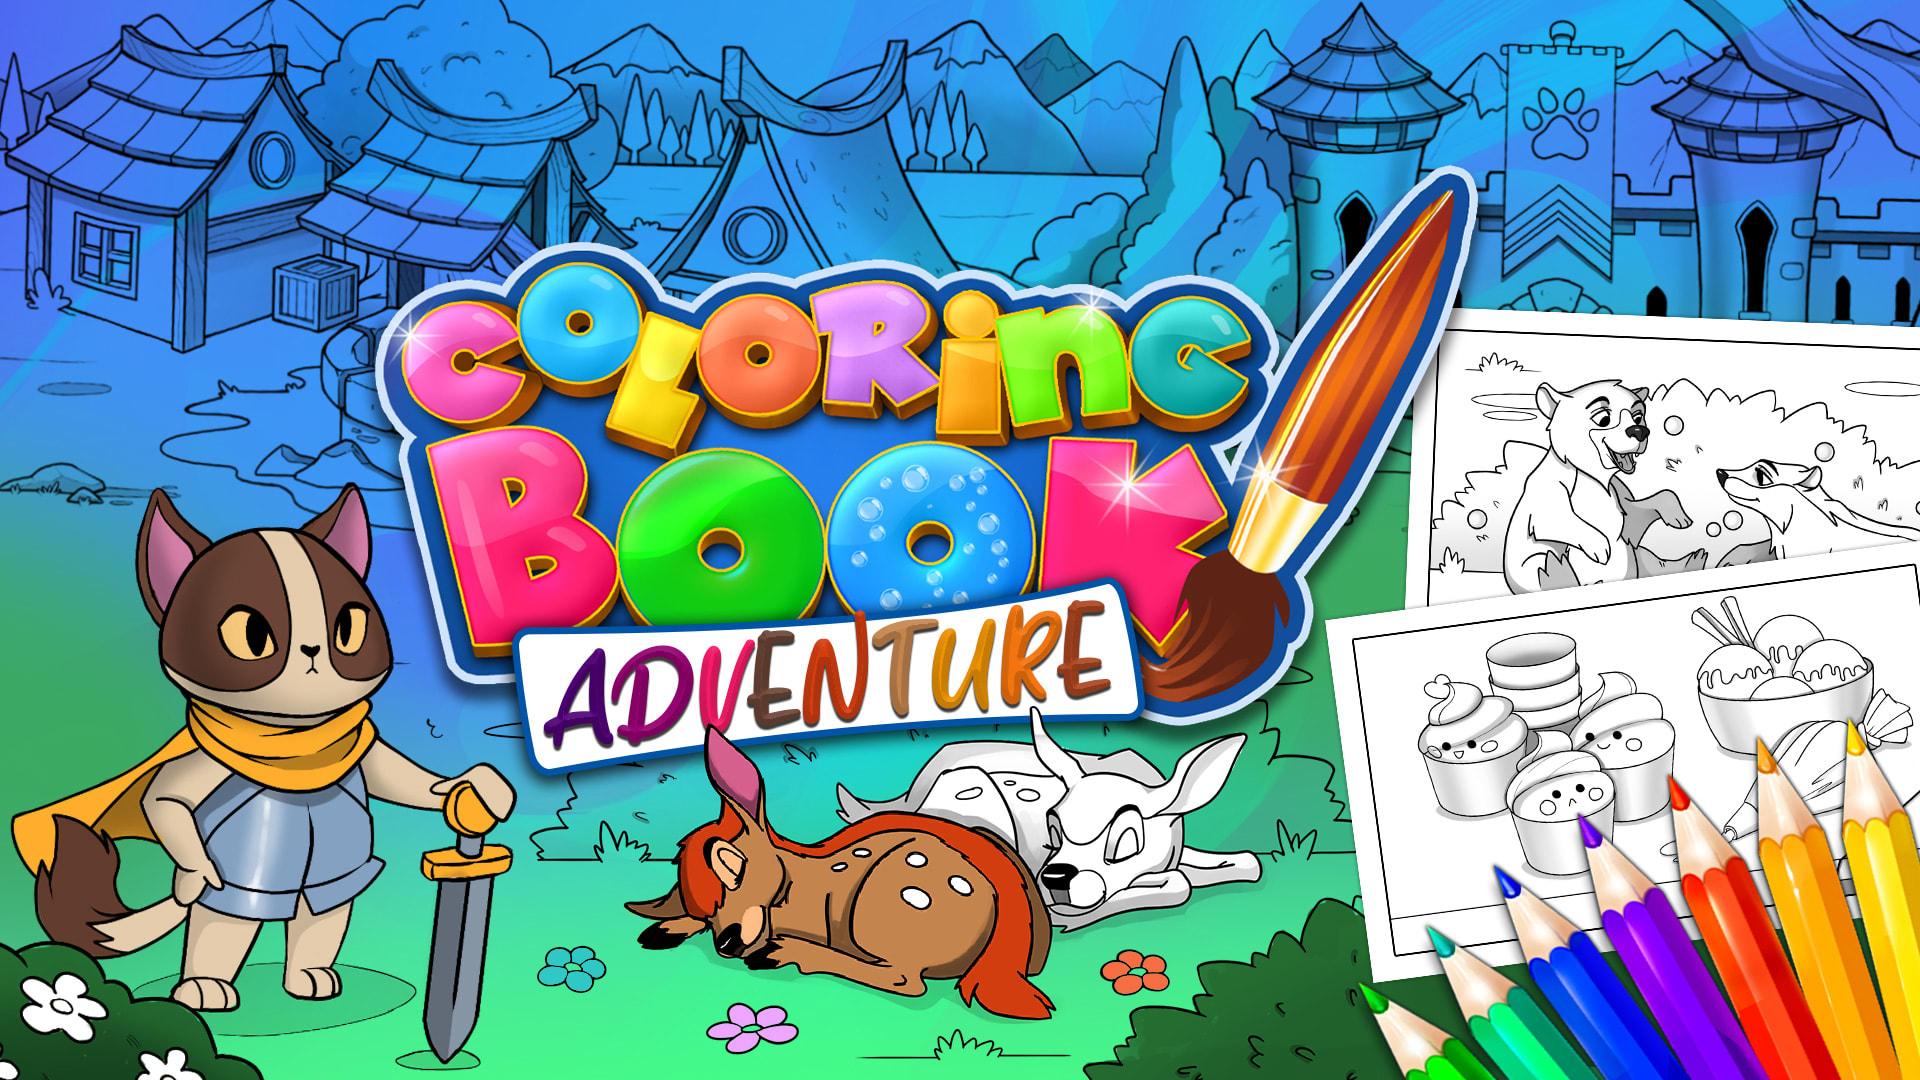 Coloring Book: Adventure Chapter - 29 drawings